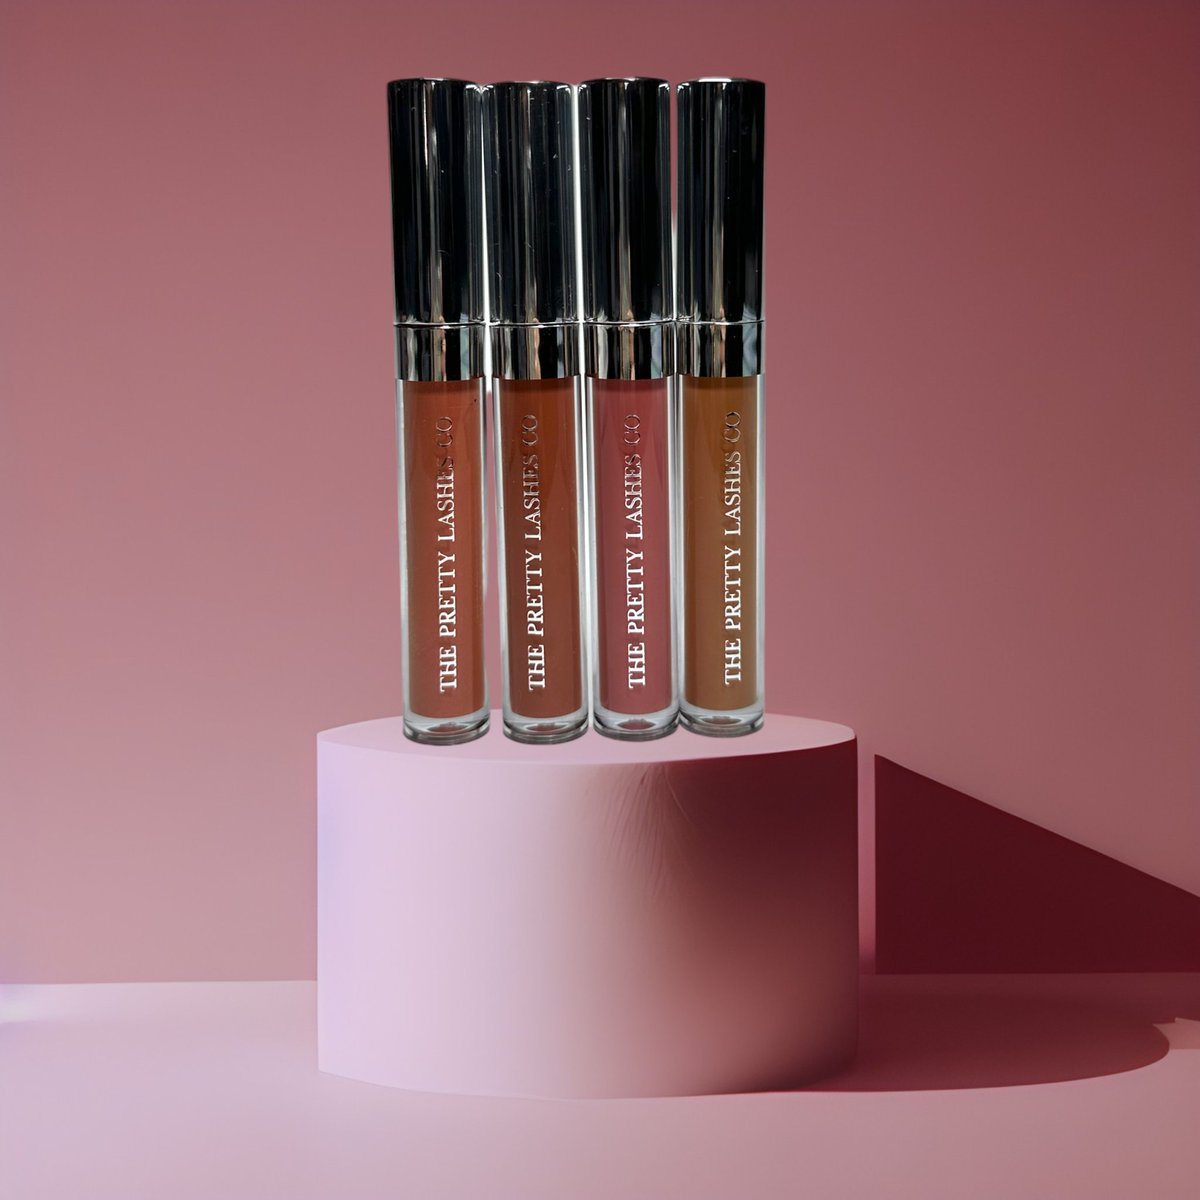 Discover luscious lips look with our high gloss Lipgloss! Experience high pigmentation and glossy shine that will make everyone turn heads. Get bold and daring with our lipgloss! #beautytwitter #lipgloss #cosmetics #makeup #beautylovers #beautyblogger #beautytips #PR #Explore